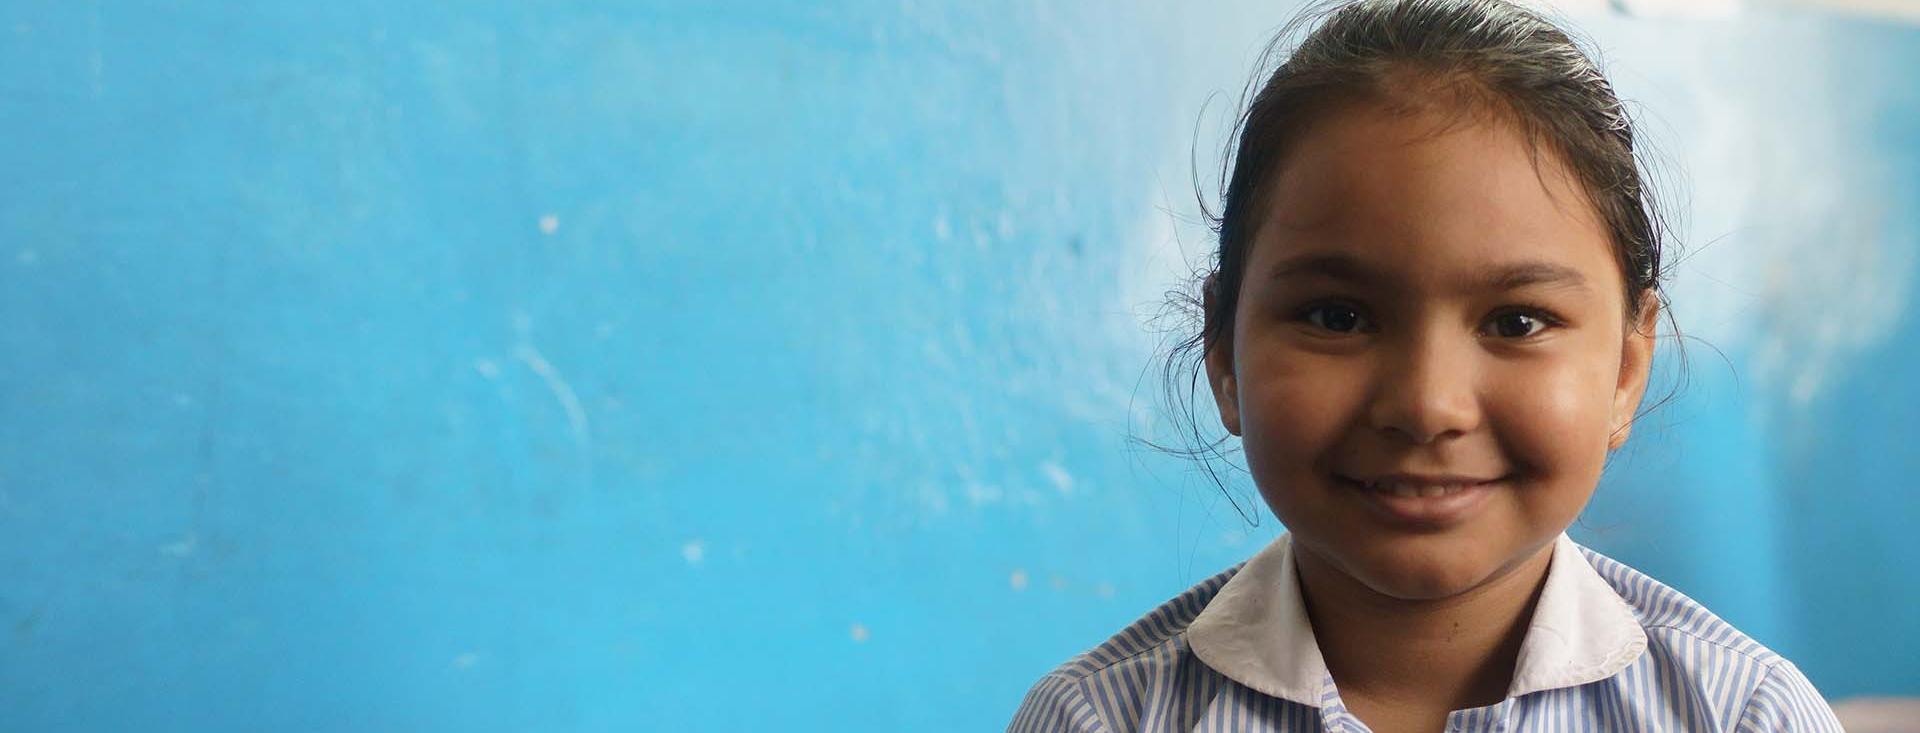 Close up of a young South Asian girl smiling with a painted blue wall in the background